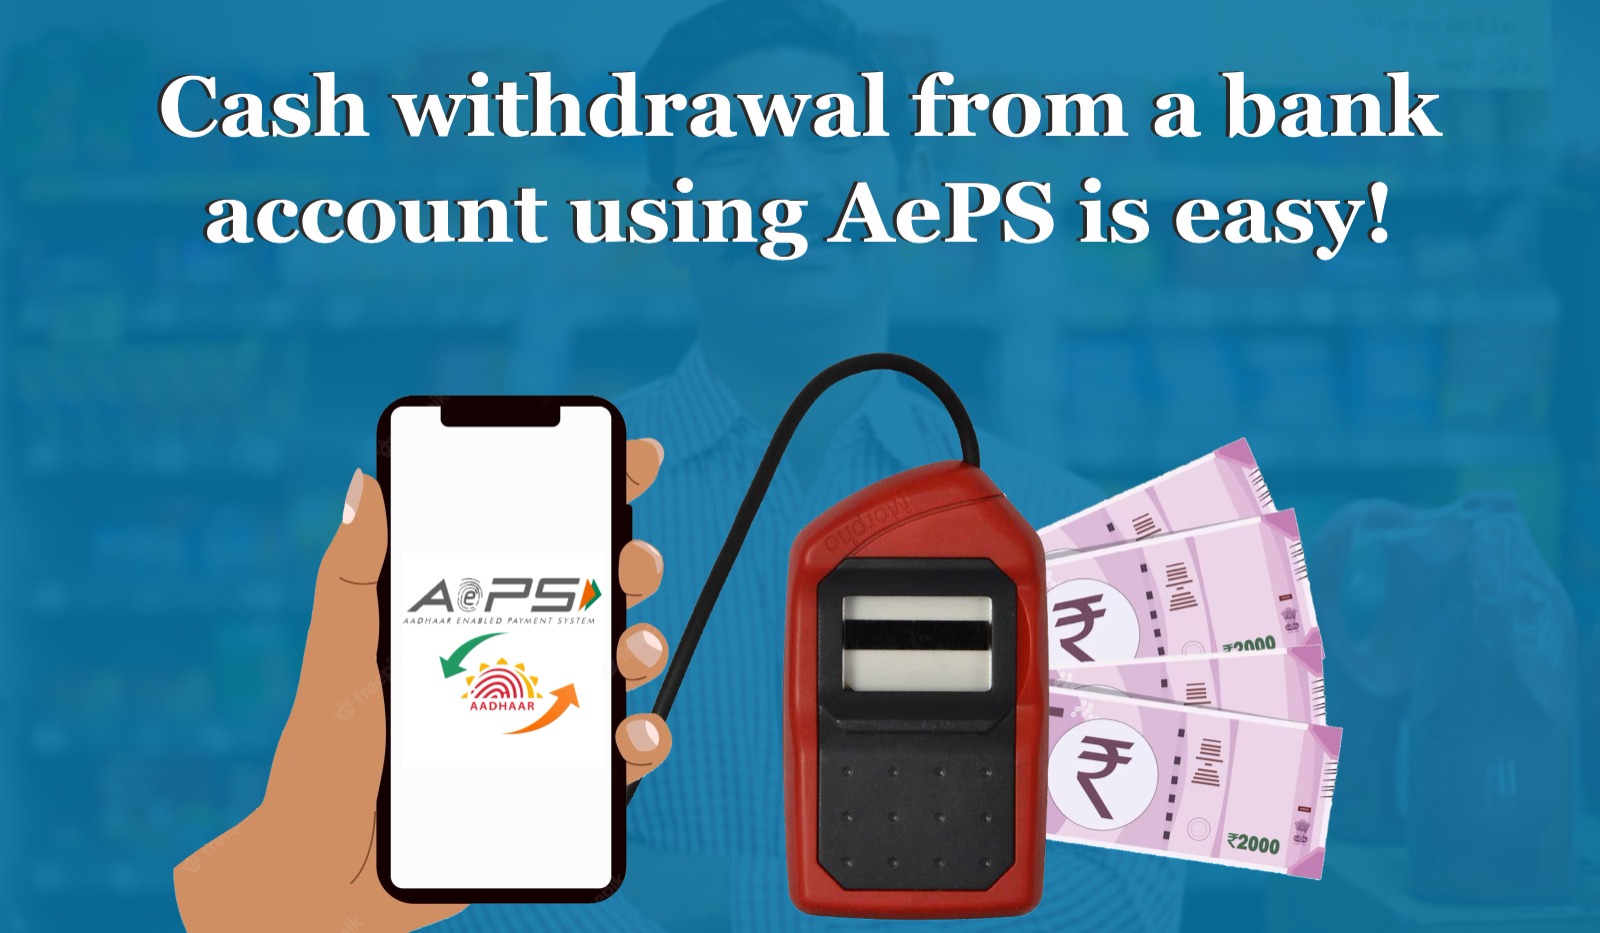 How to withdraw money from a bank account using AePS?